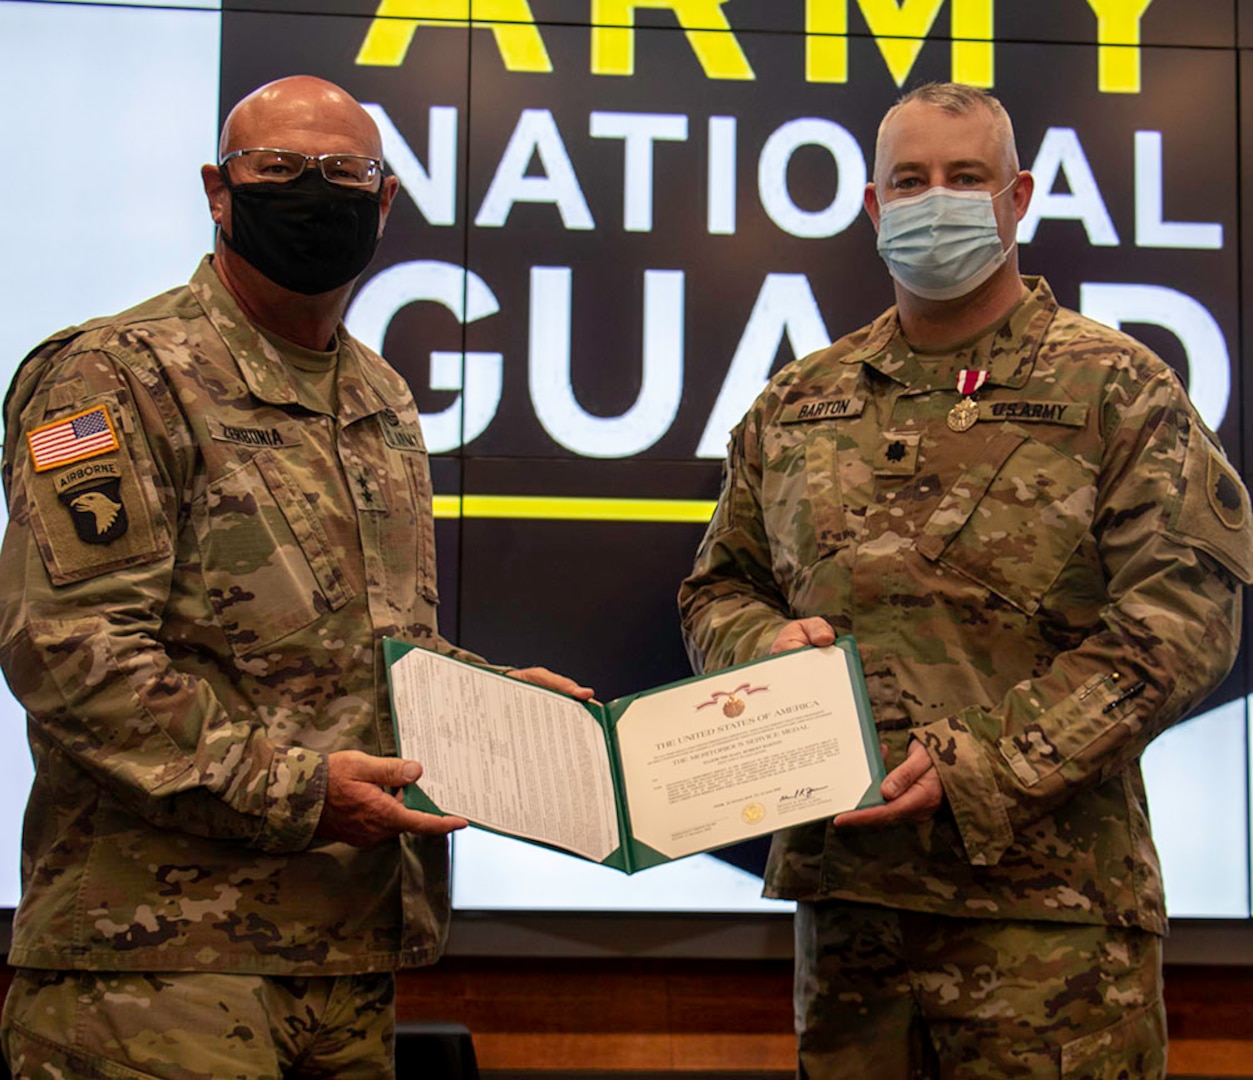 Newly promoted Lt. Col. Michael Barton, of Greenview, Illinois, (right) receives the Meritorious Service Medal from Maj. Gen. Michael R. Zerbonia, Assistant Adjutant General – Army, Illinois National Guard and Commander, Illinois Army National Guard, for Barton’s work as the Assistant to the Chief of Staff, Illinois Army National Guard.